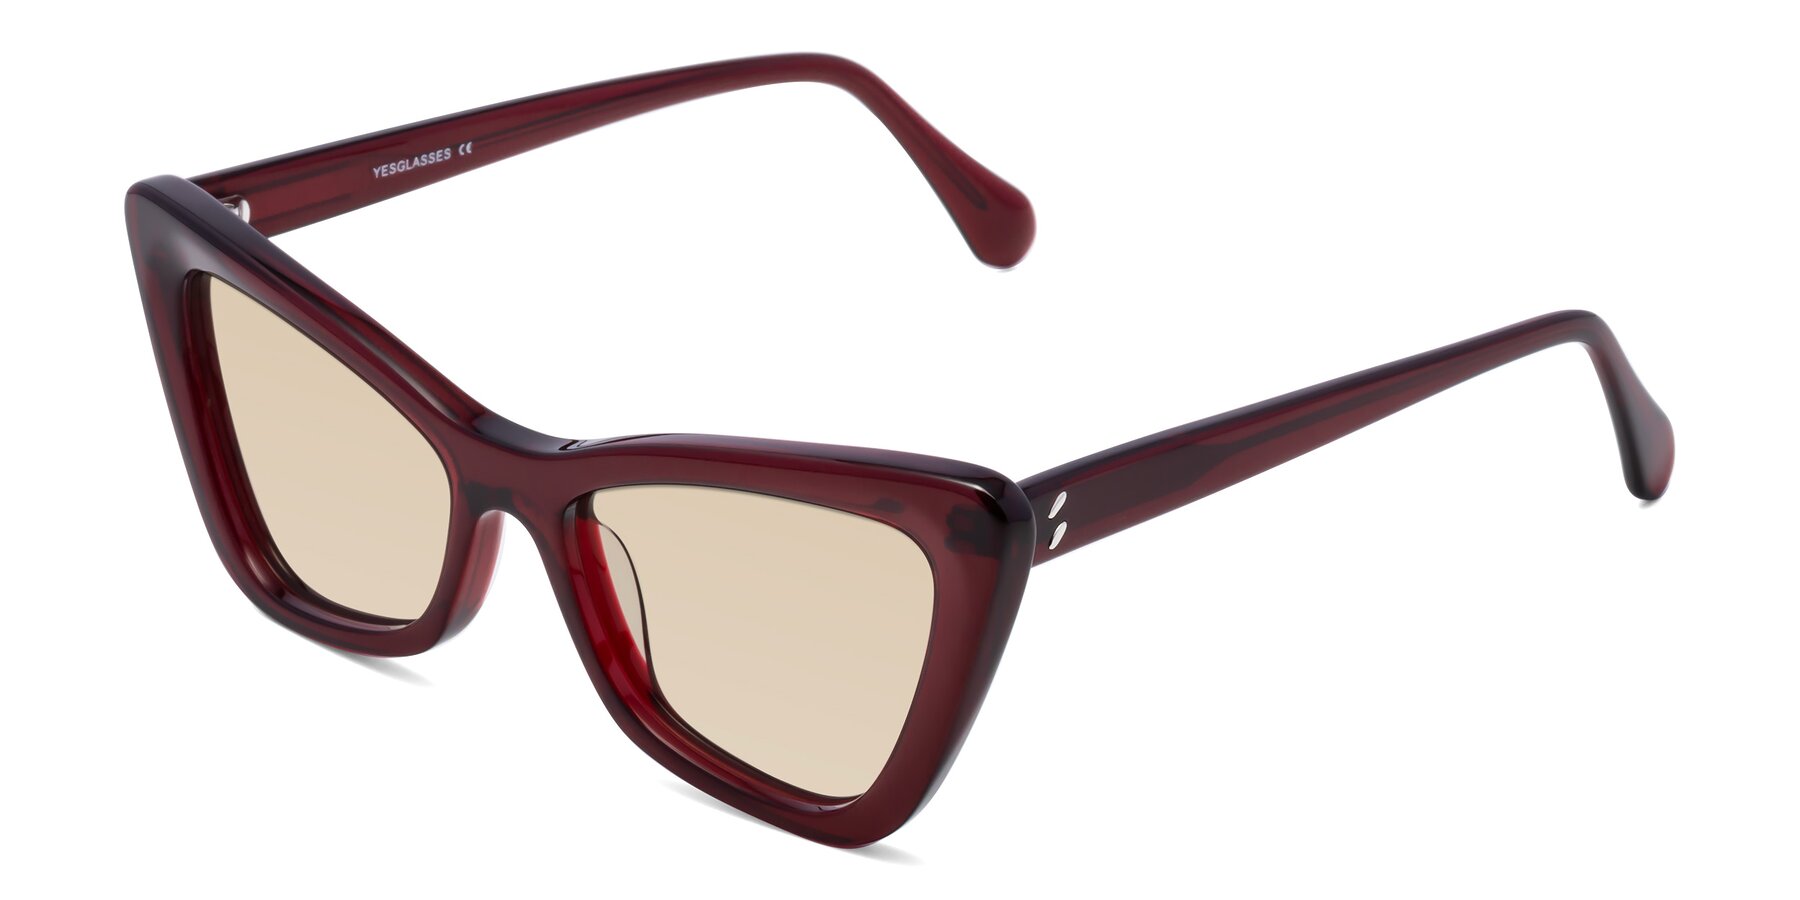 Angle of Rua in Wine with Light Brown Tinted Lenses